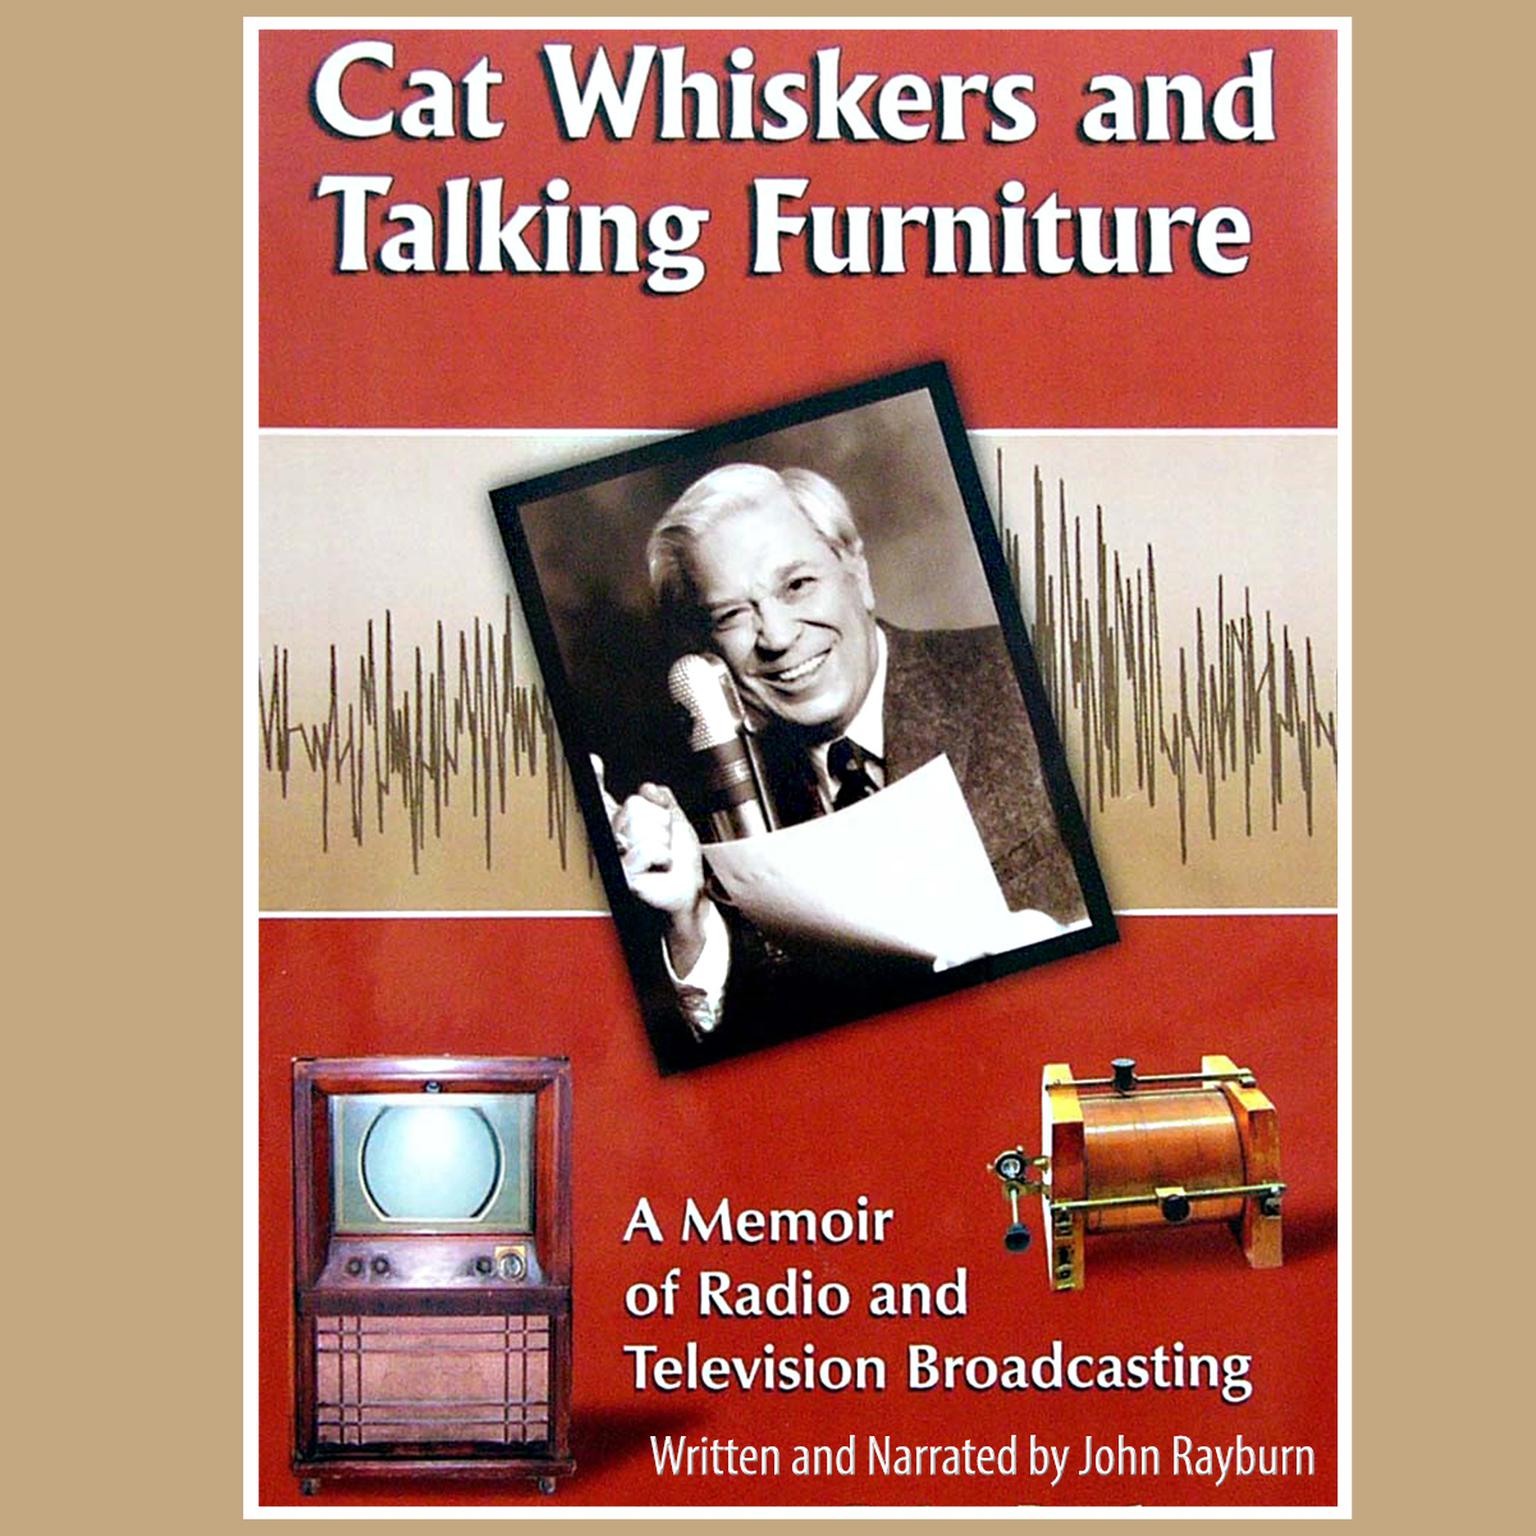 Cat Whiskers and Talking Furniture: A Memoir of Radio and Television Broadcasting Audiobook, by John Rayburn